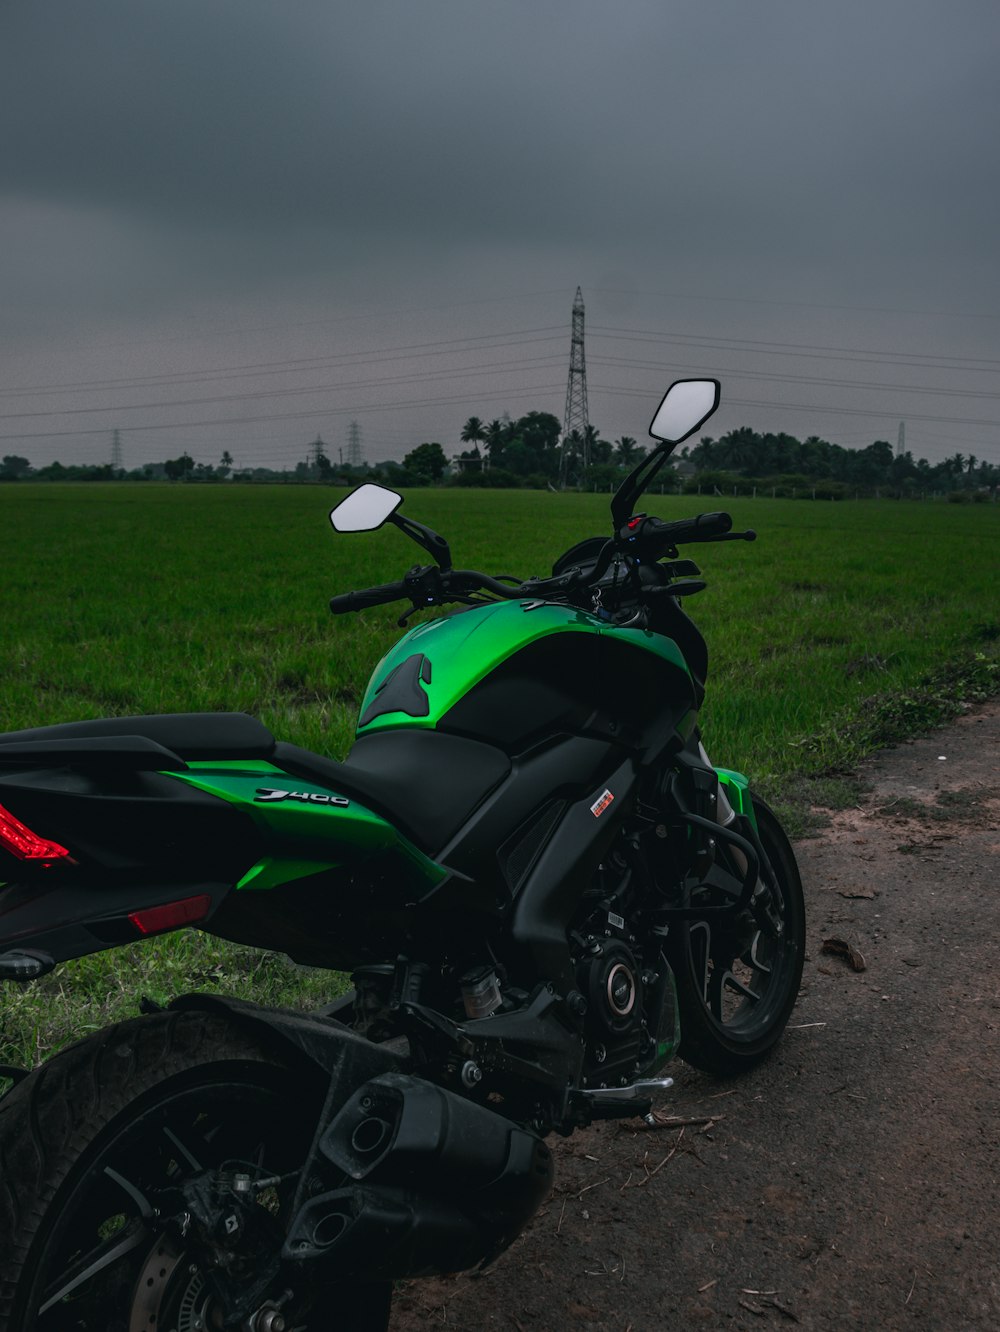 a green and black motorcycle parked on the side of a road